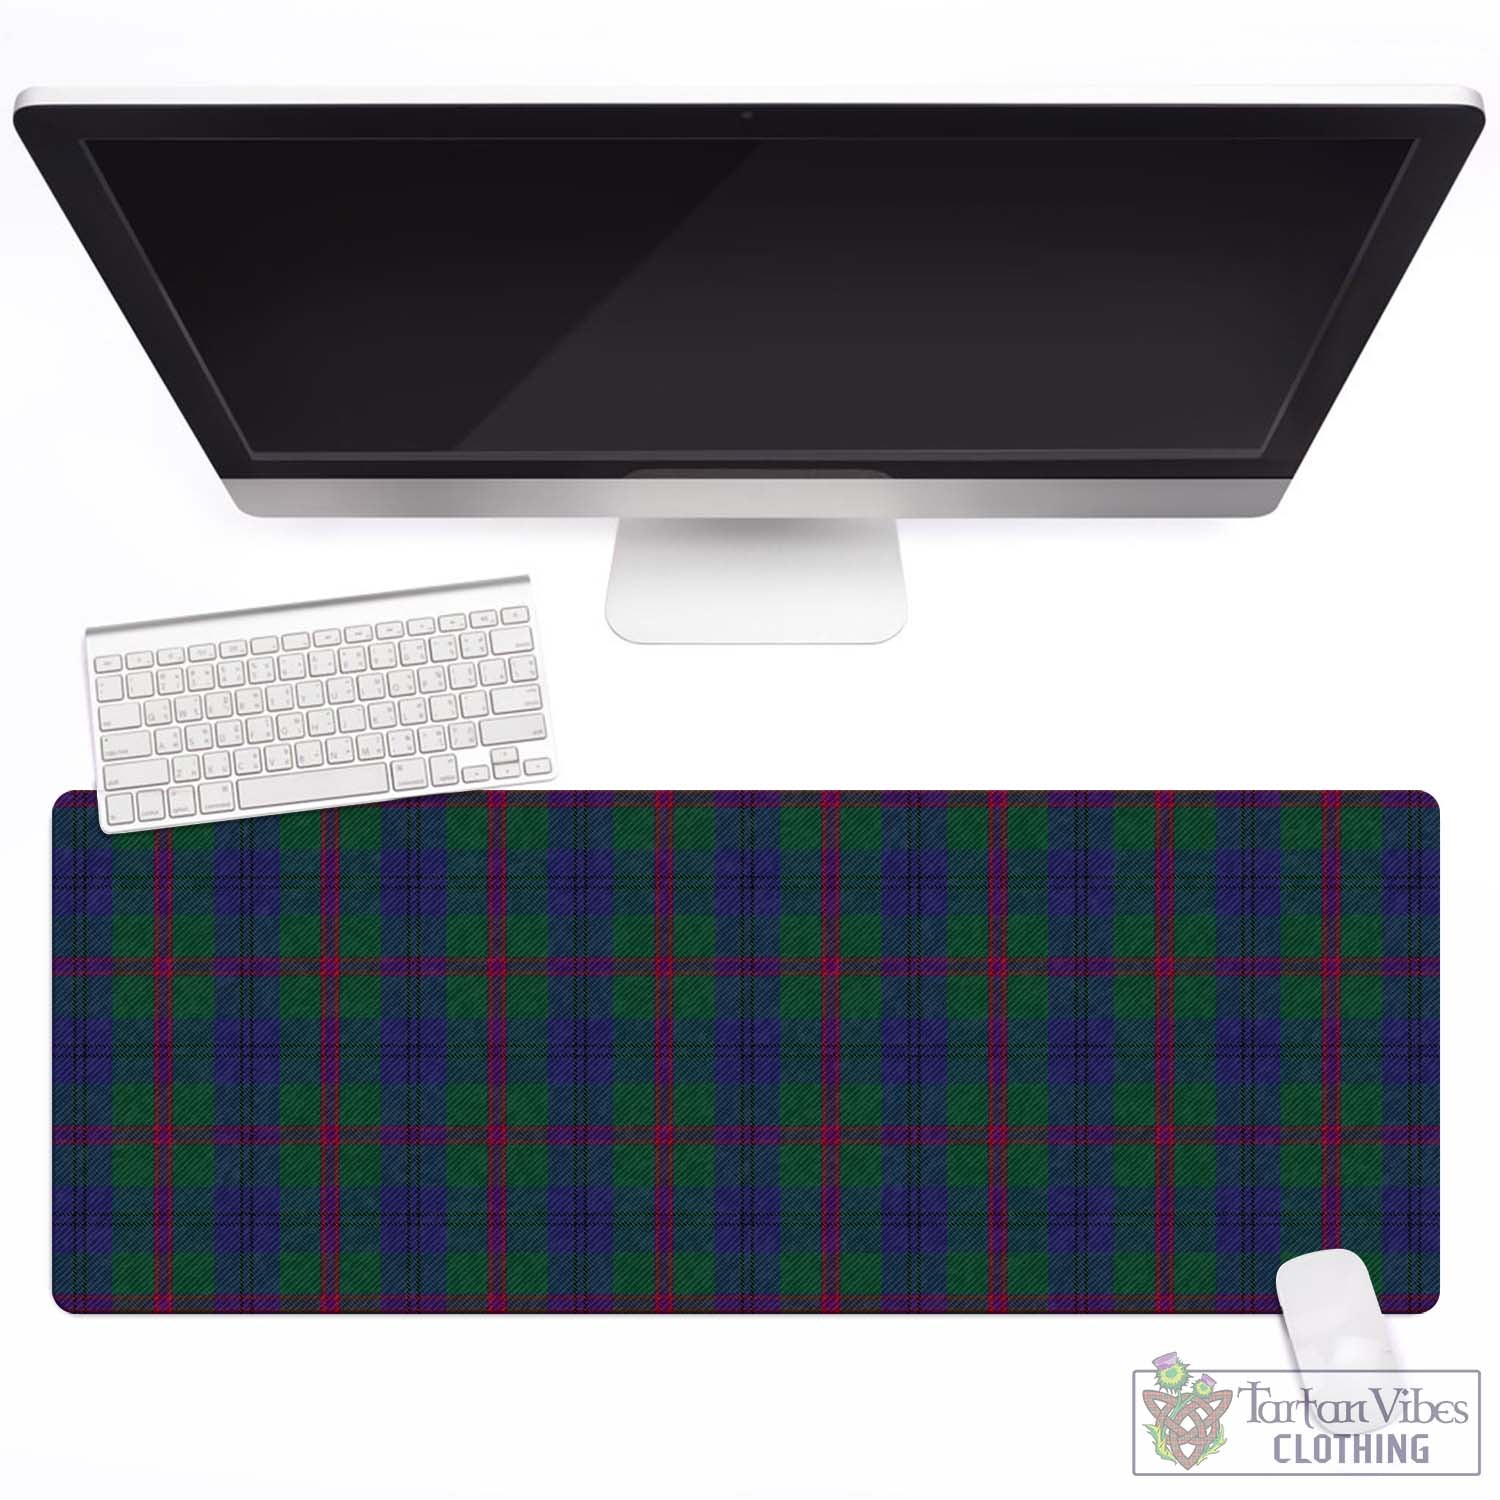 Tartan Vibes Clothing Laurie Tartan Mouse Pad